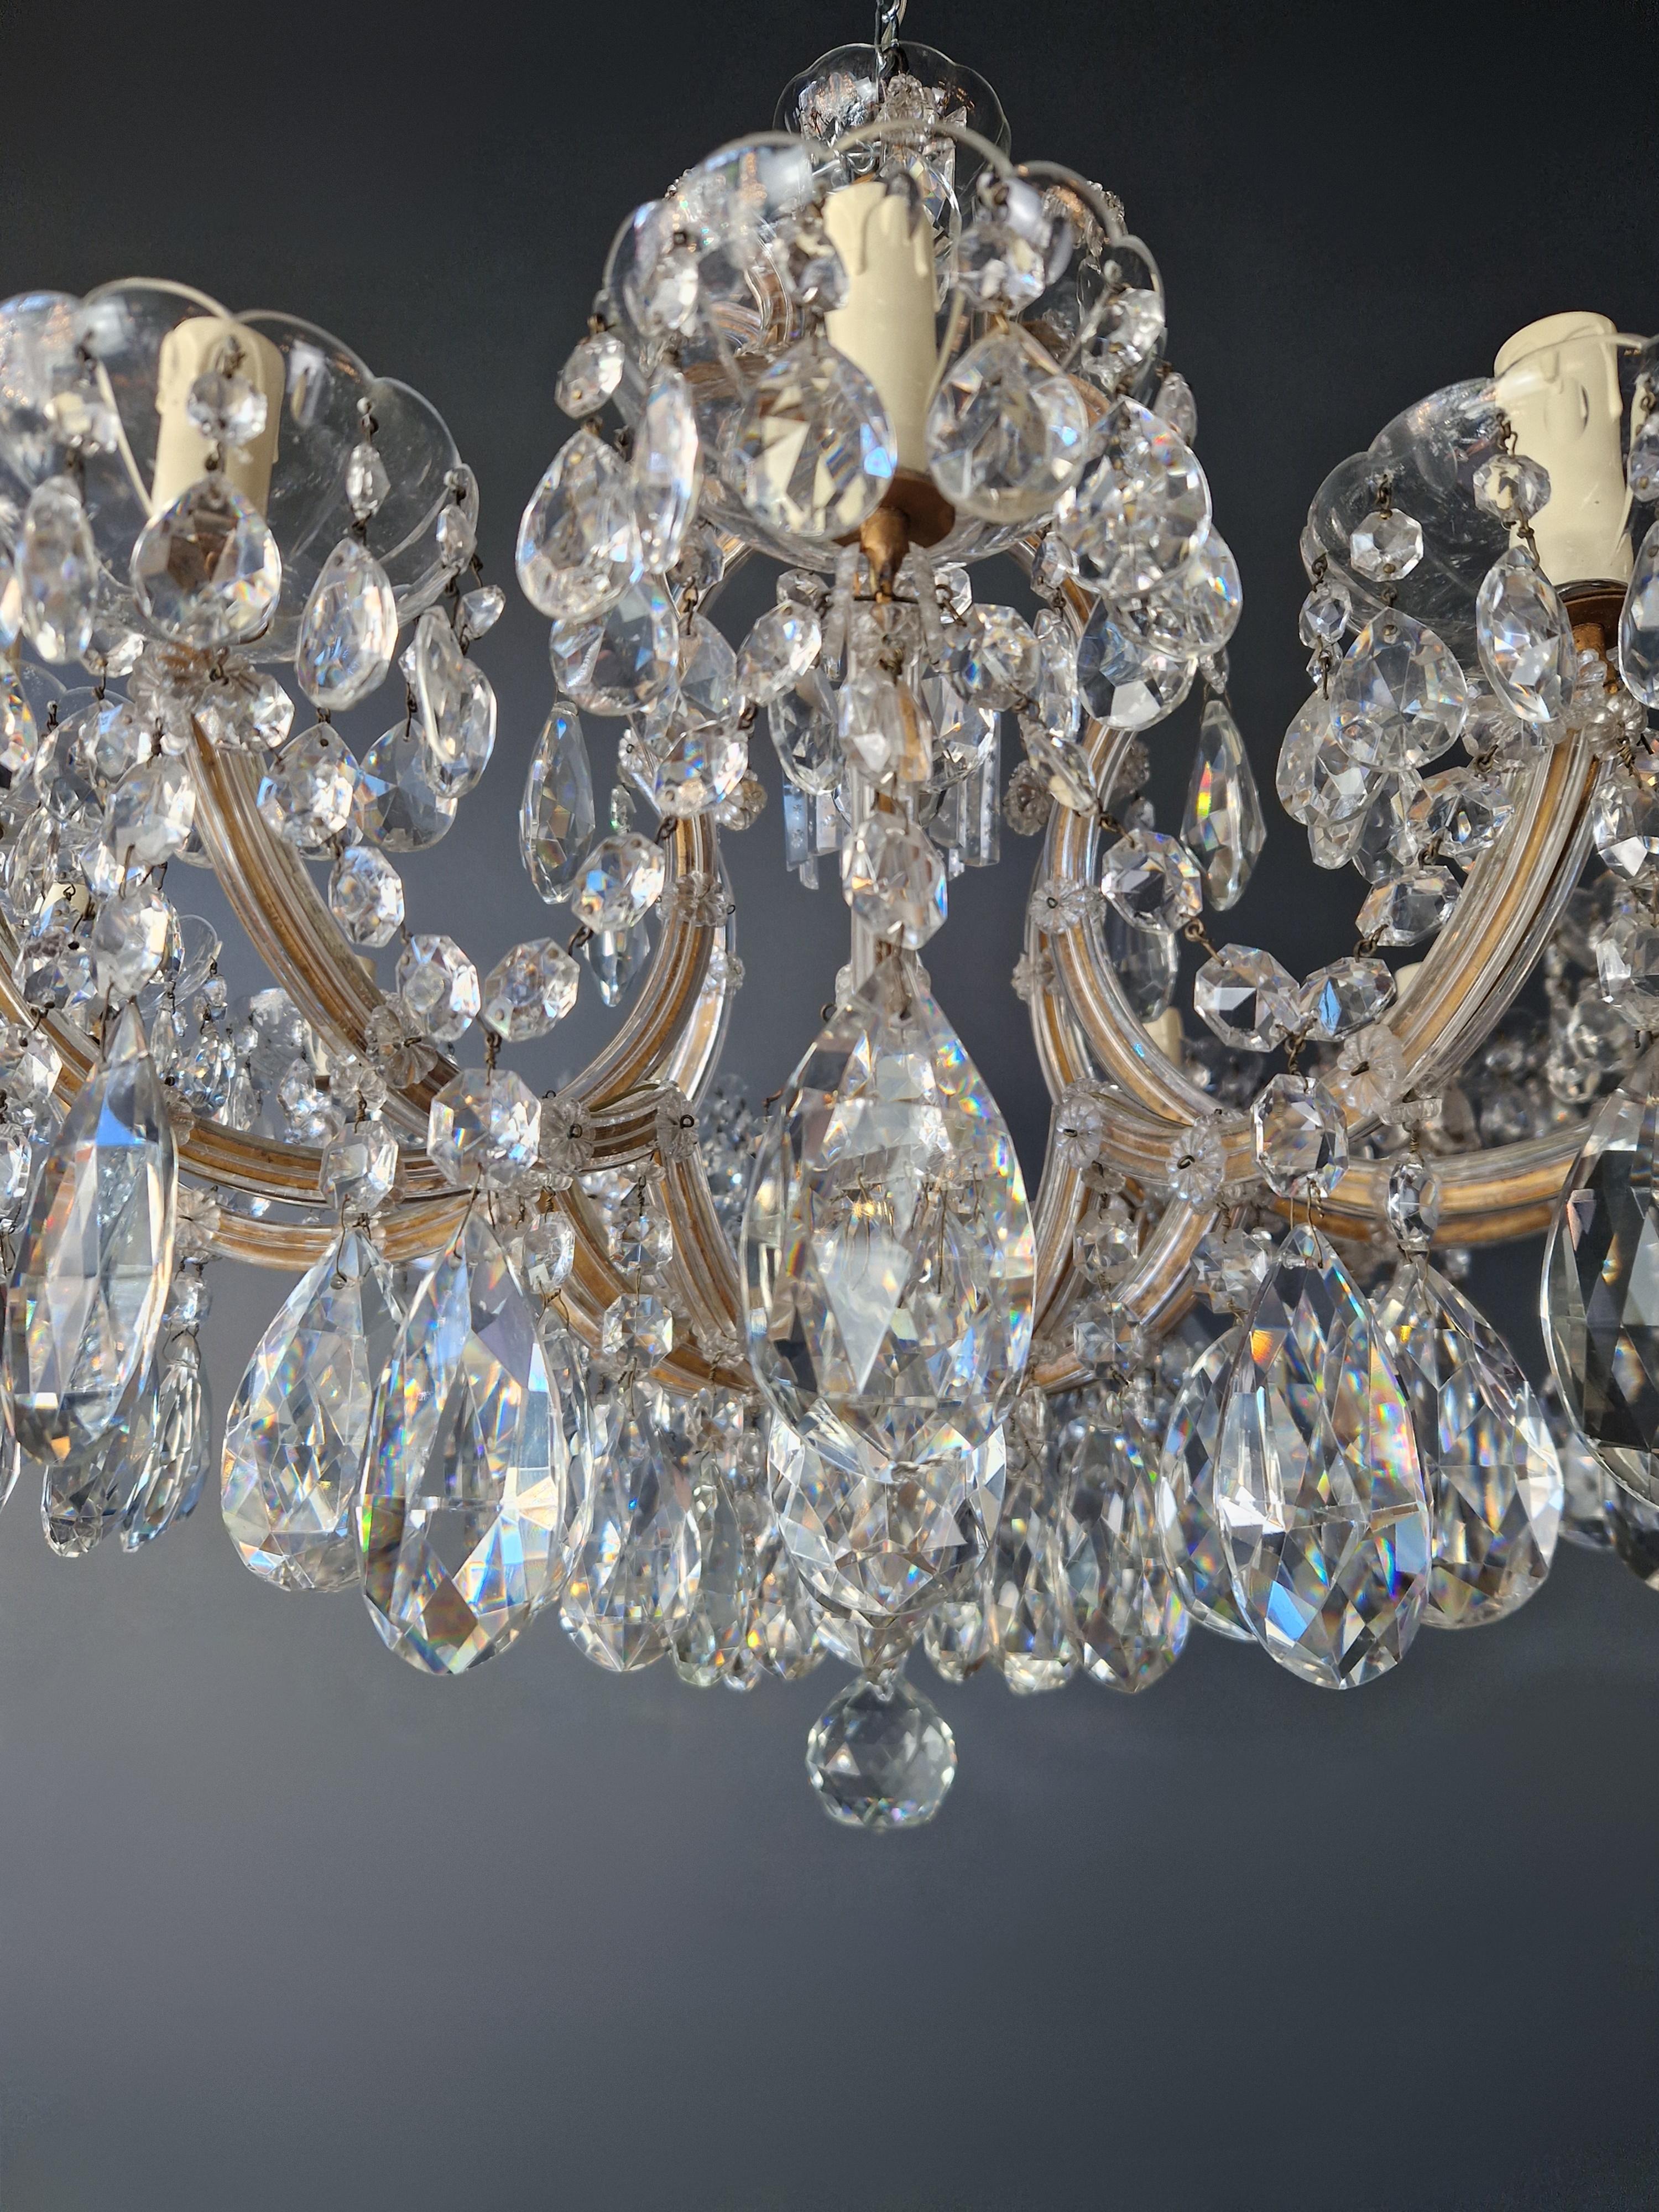 1930s Art Nouveau Maria Theresa Crystal Chandelier lustre Brass Glass  For Sale 2